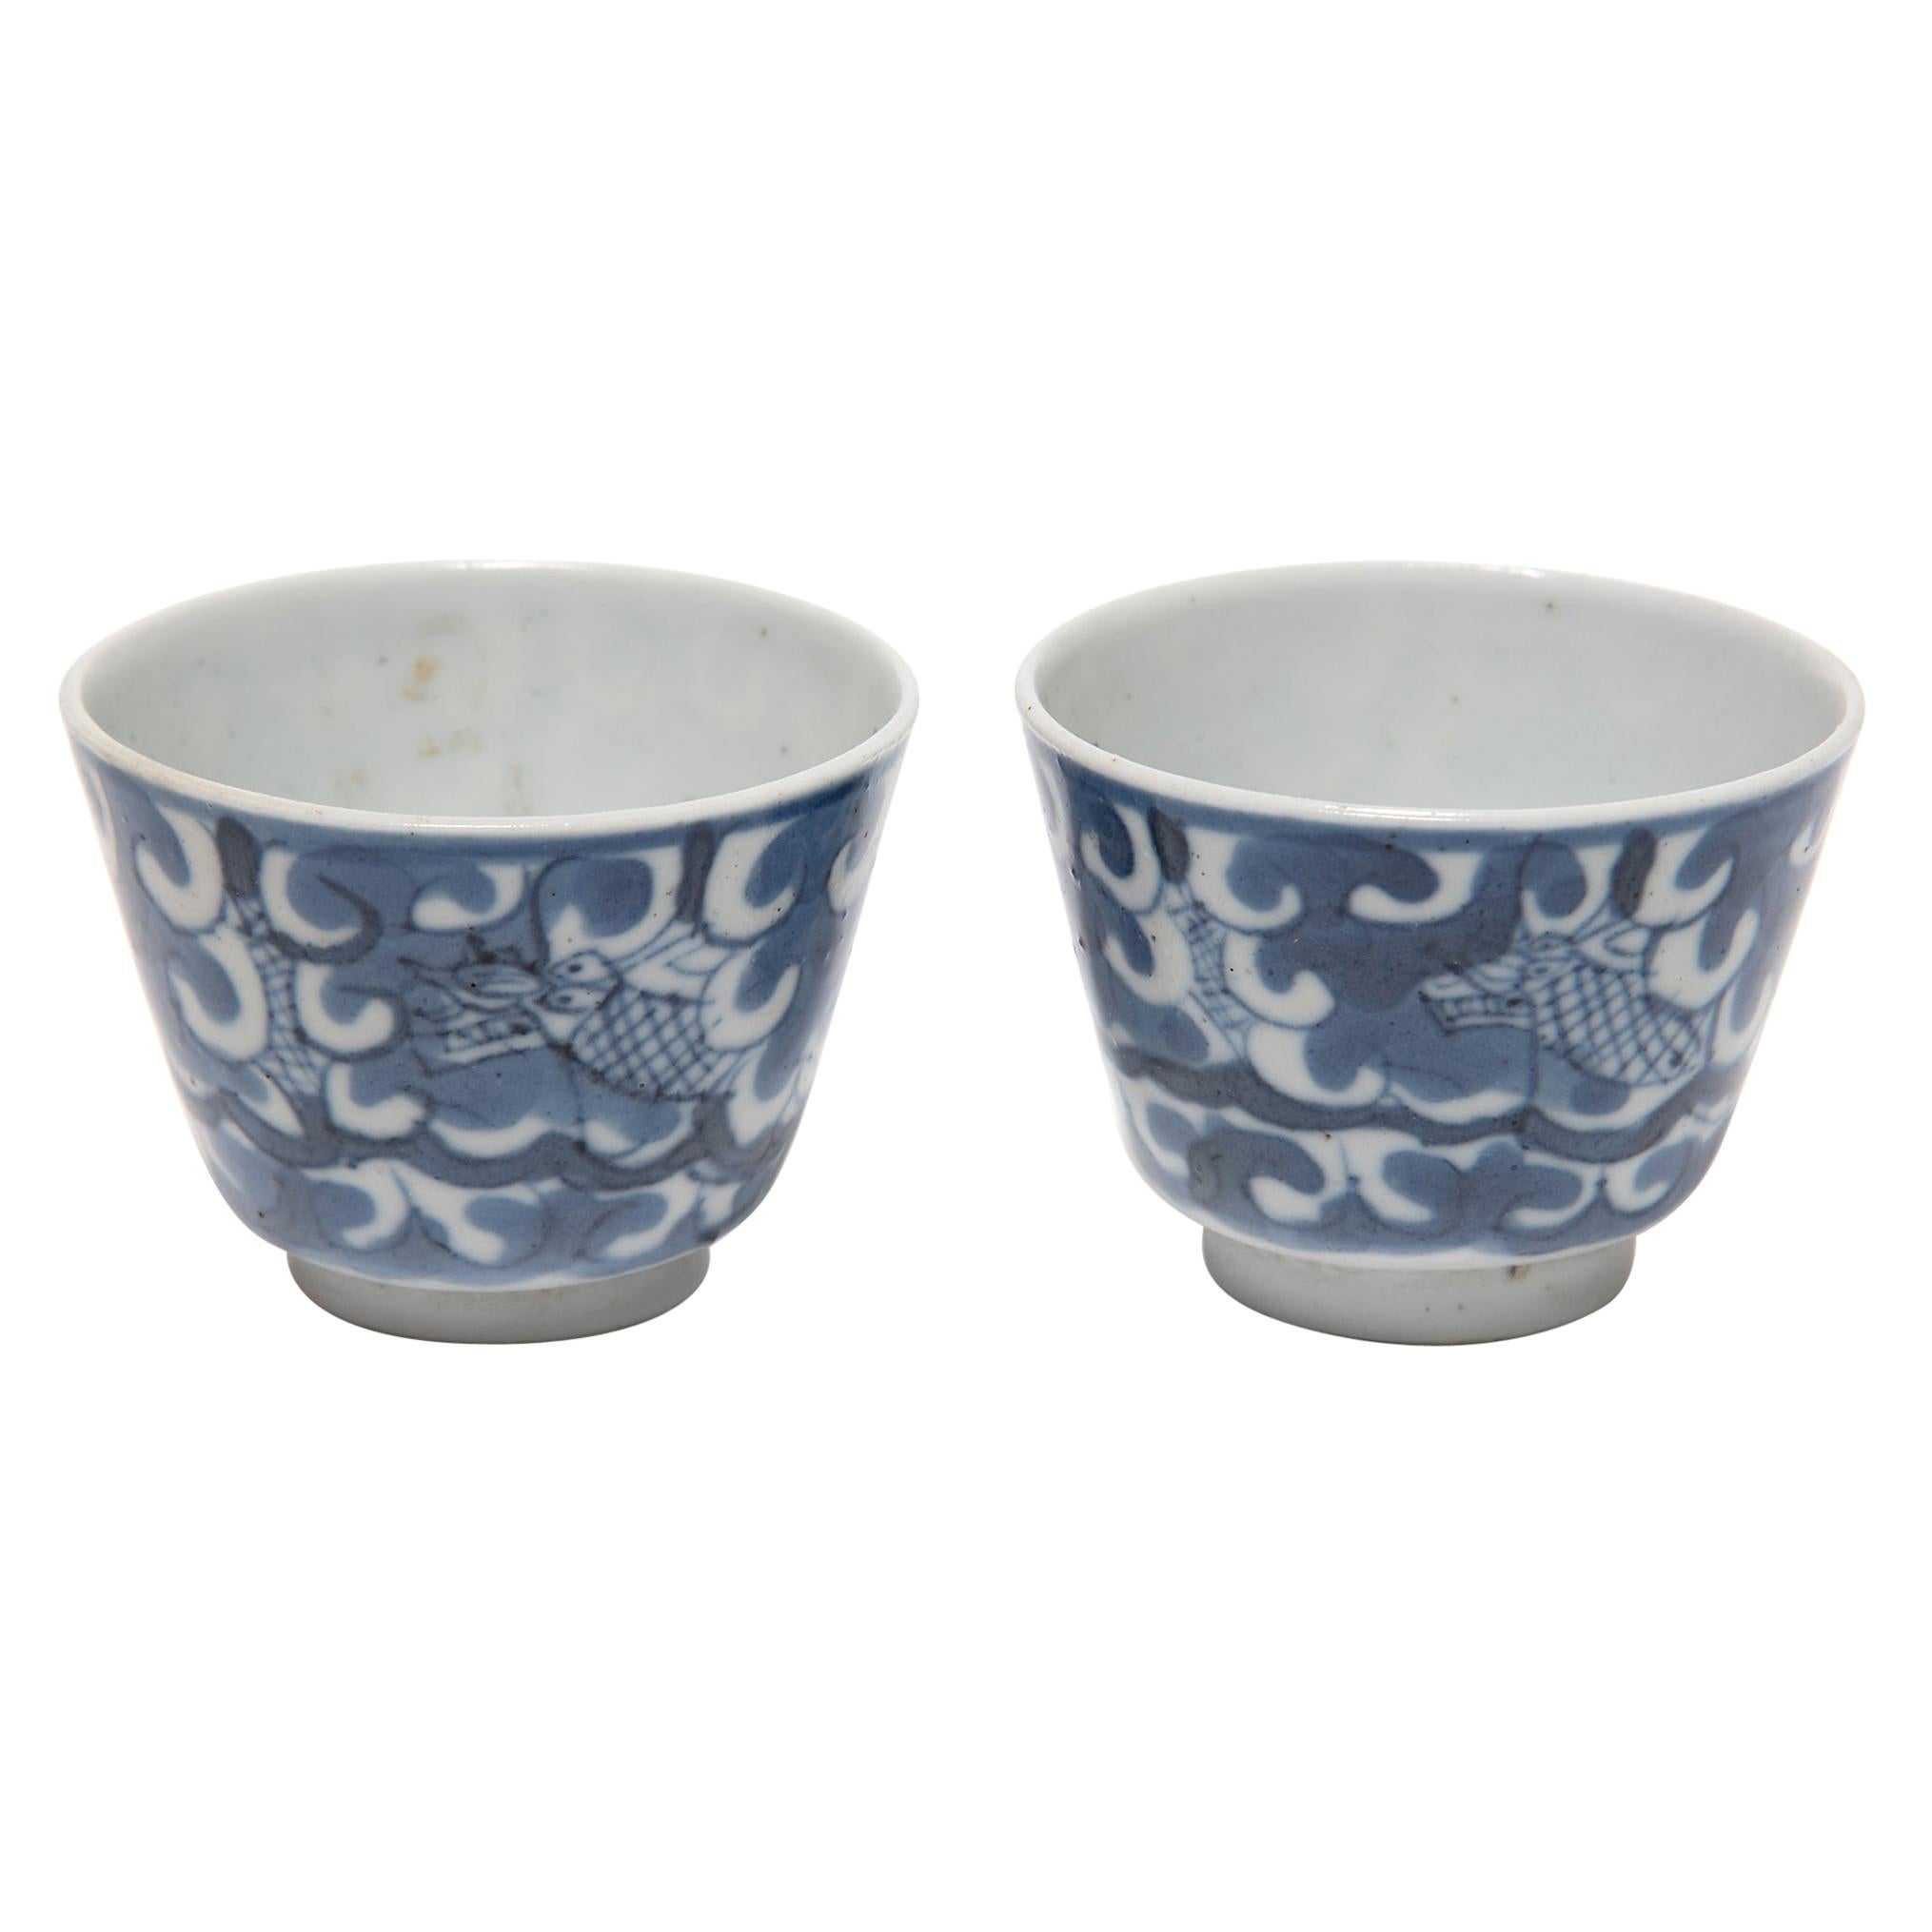 Pair of Early 20th Century Chinese Blue and White Tea Cups